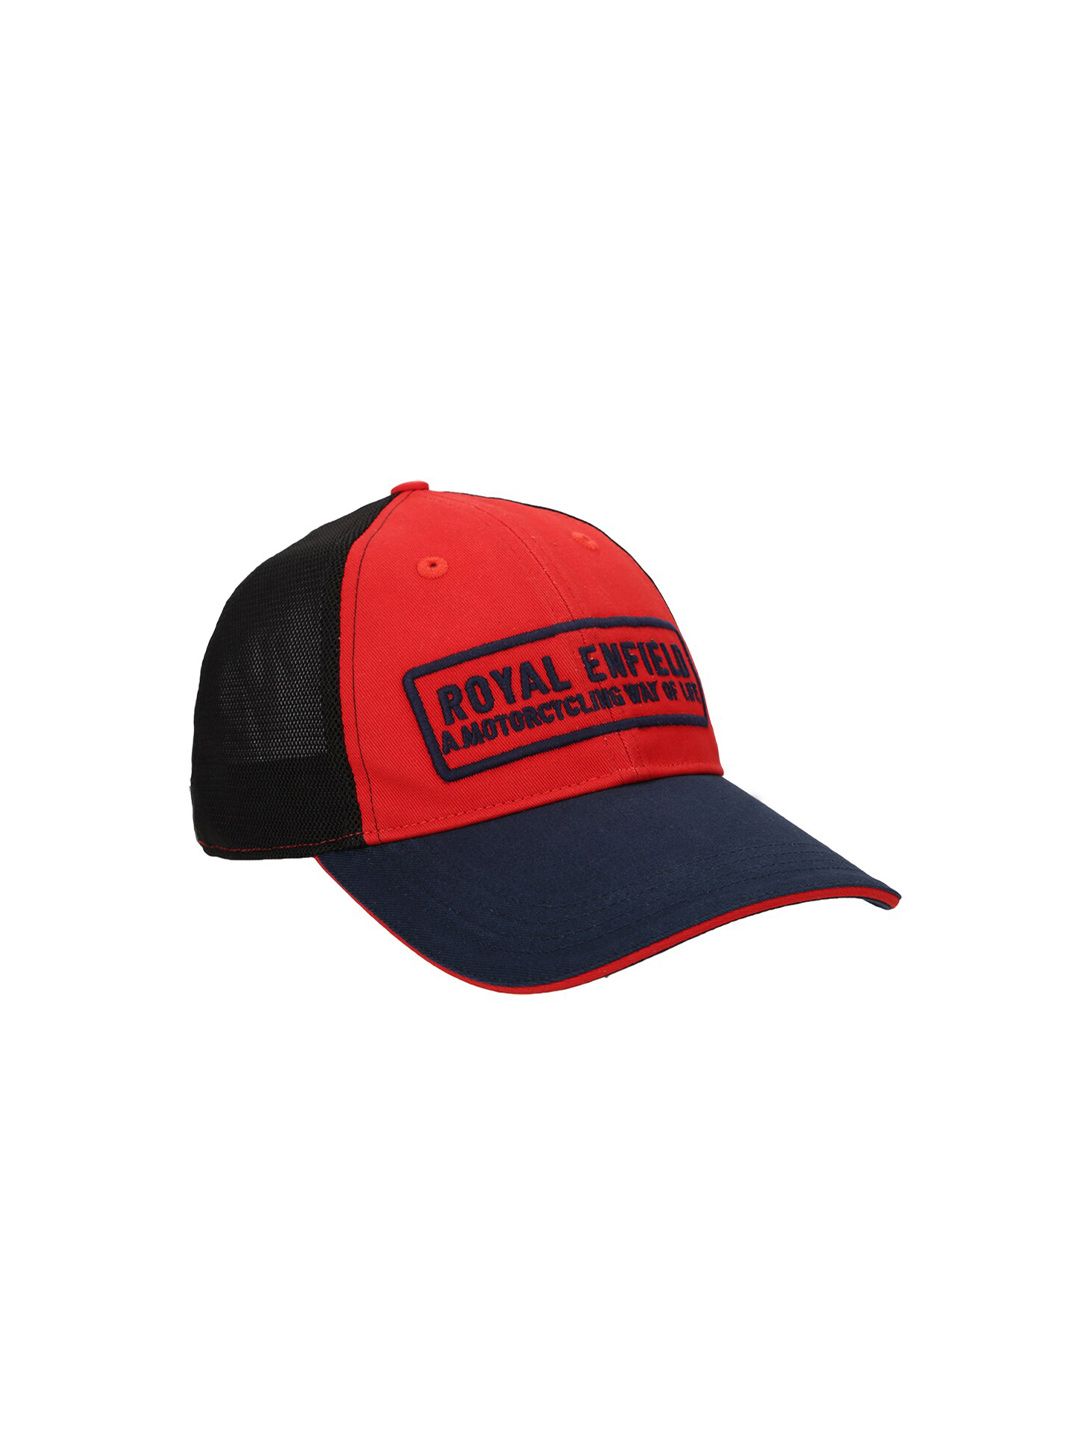 Royal Enfield Unisex Red & Blue Trucker Cap Price in India